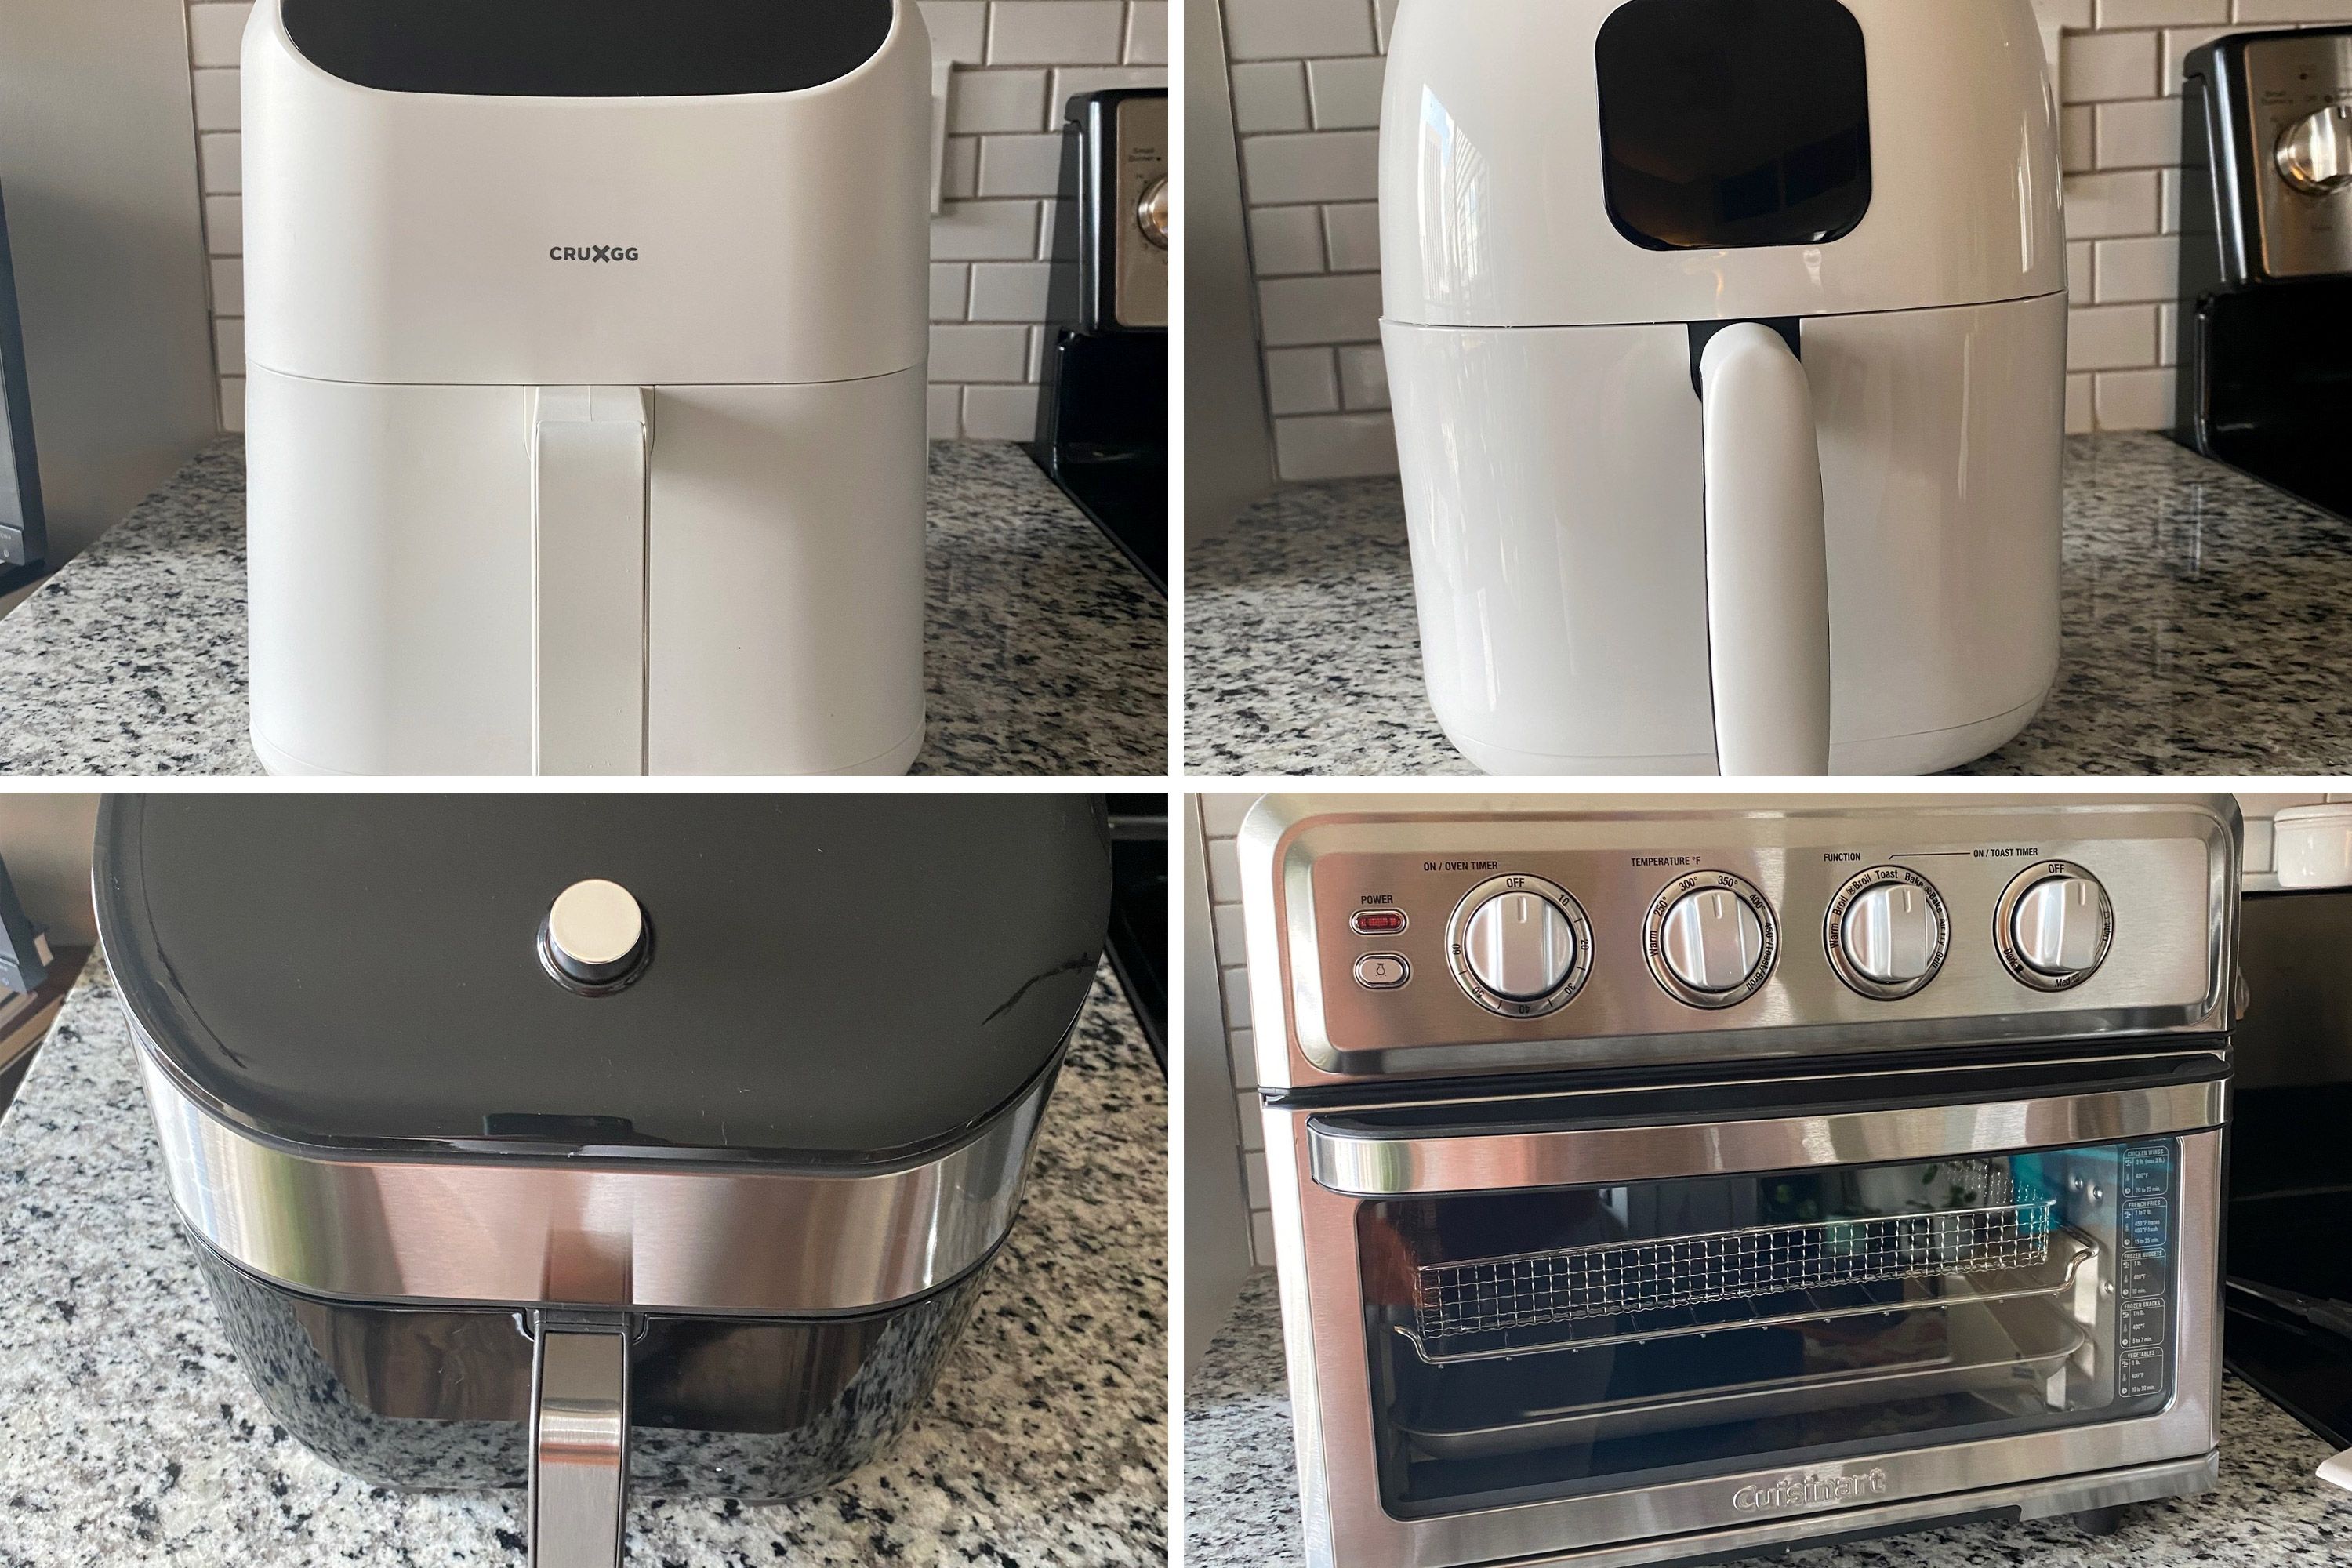 Best Air Fryer to Buy for Personal Use  Dash Compact Air Fryer Full review  